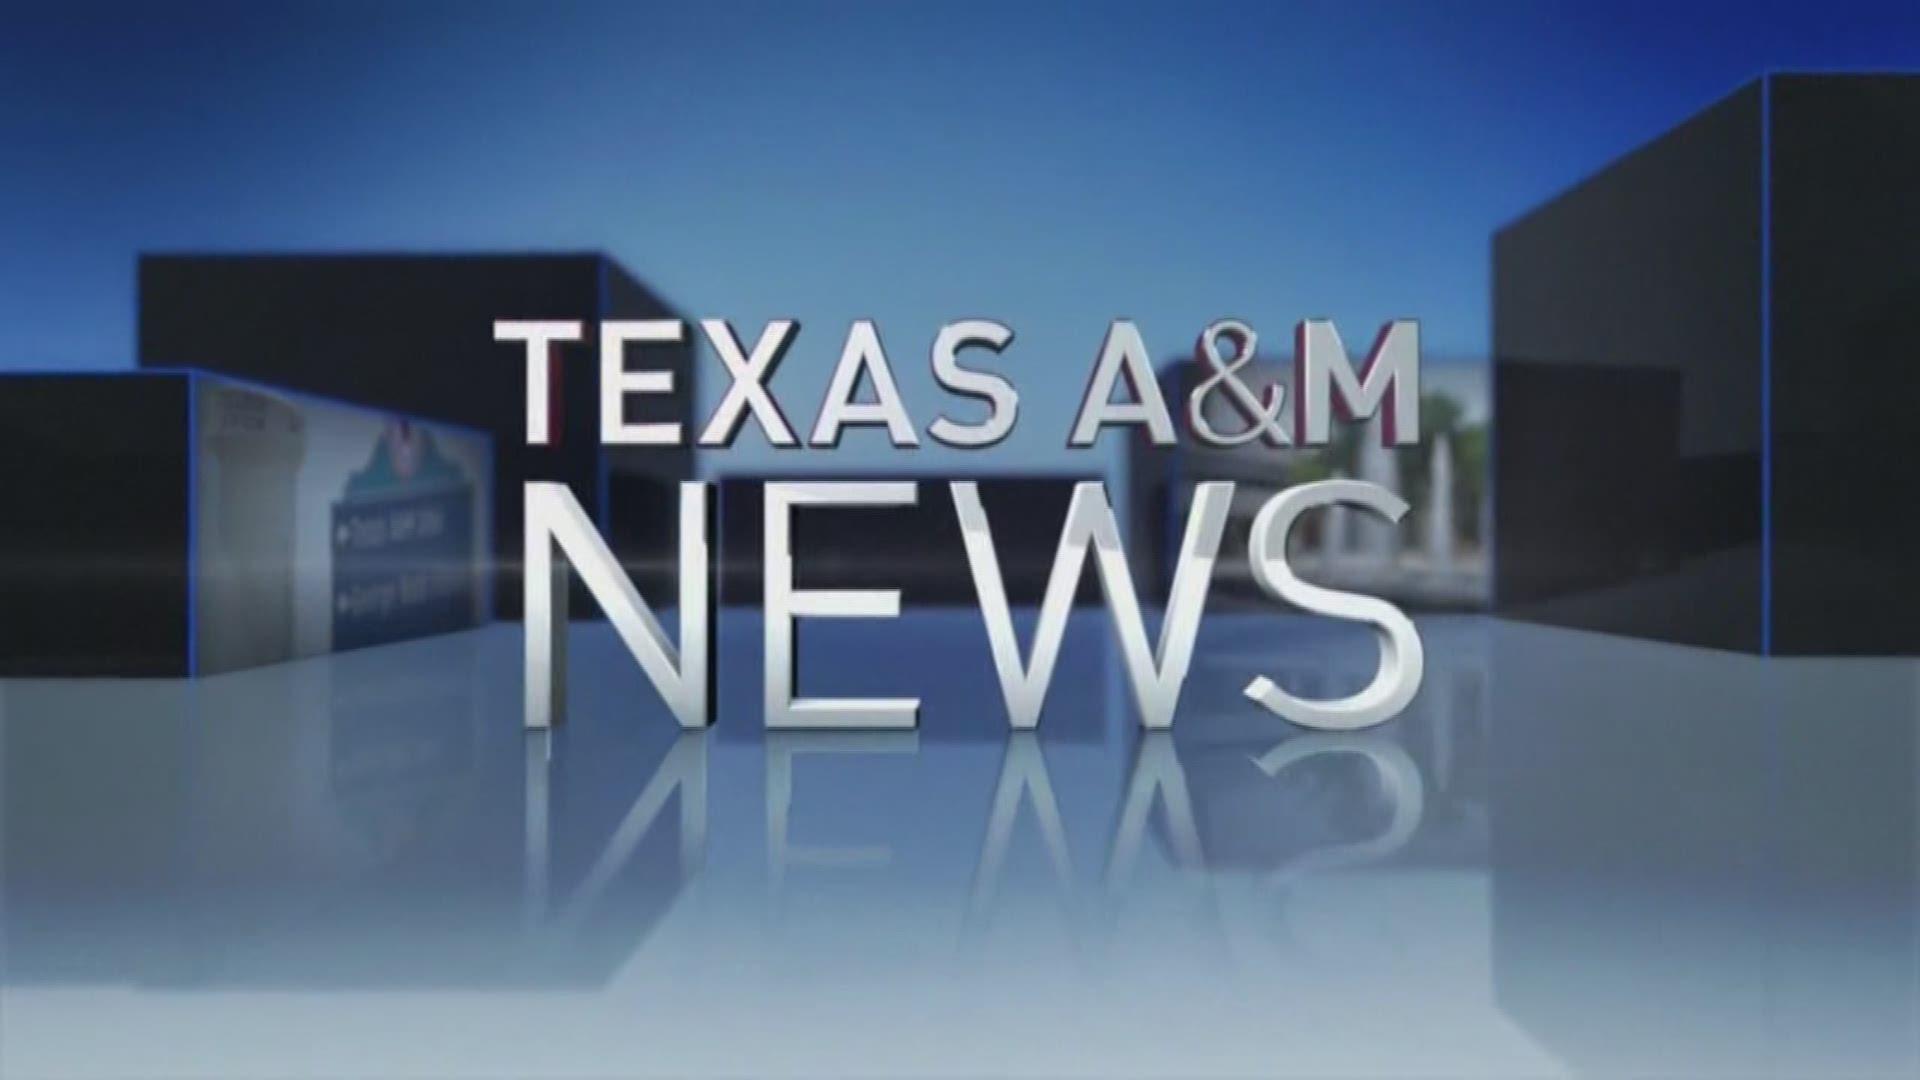 Texas A&M University system sends out its proposal for campus carry on campuses.